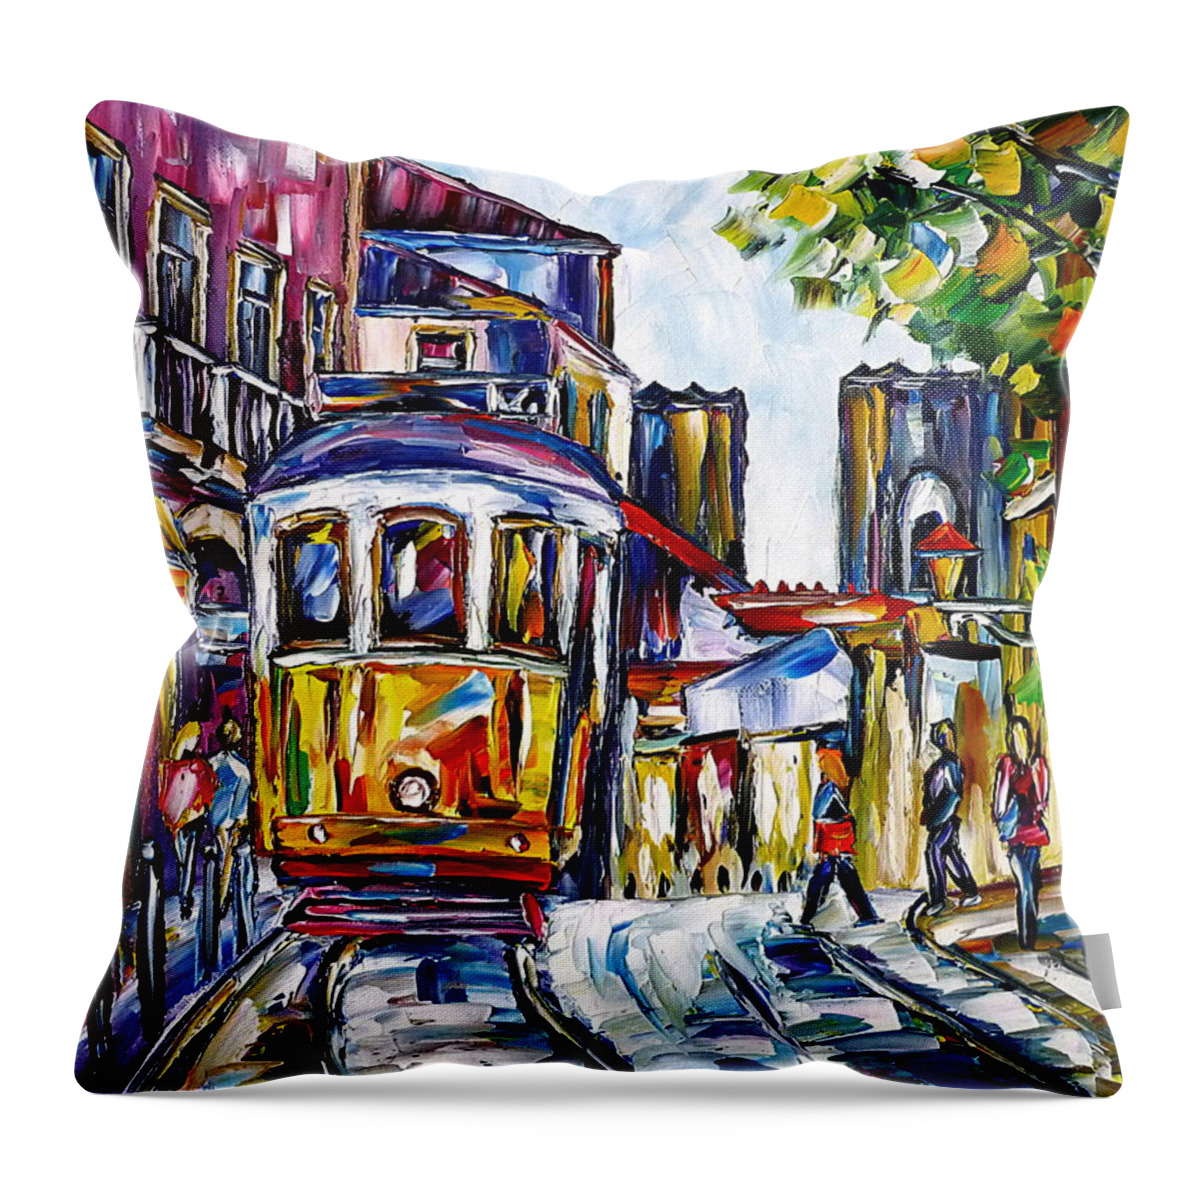 People In The City Throw Pillow featuring the painting Beautiful Lisbon by Mirek Kuzniar